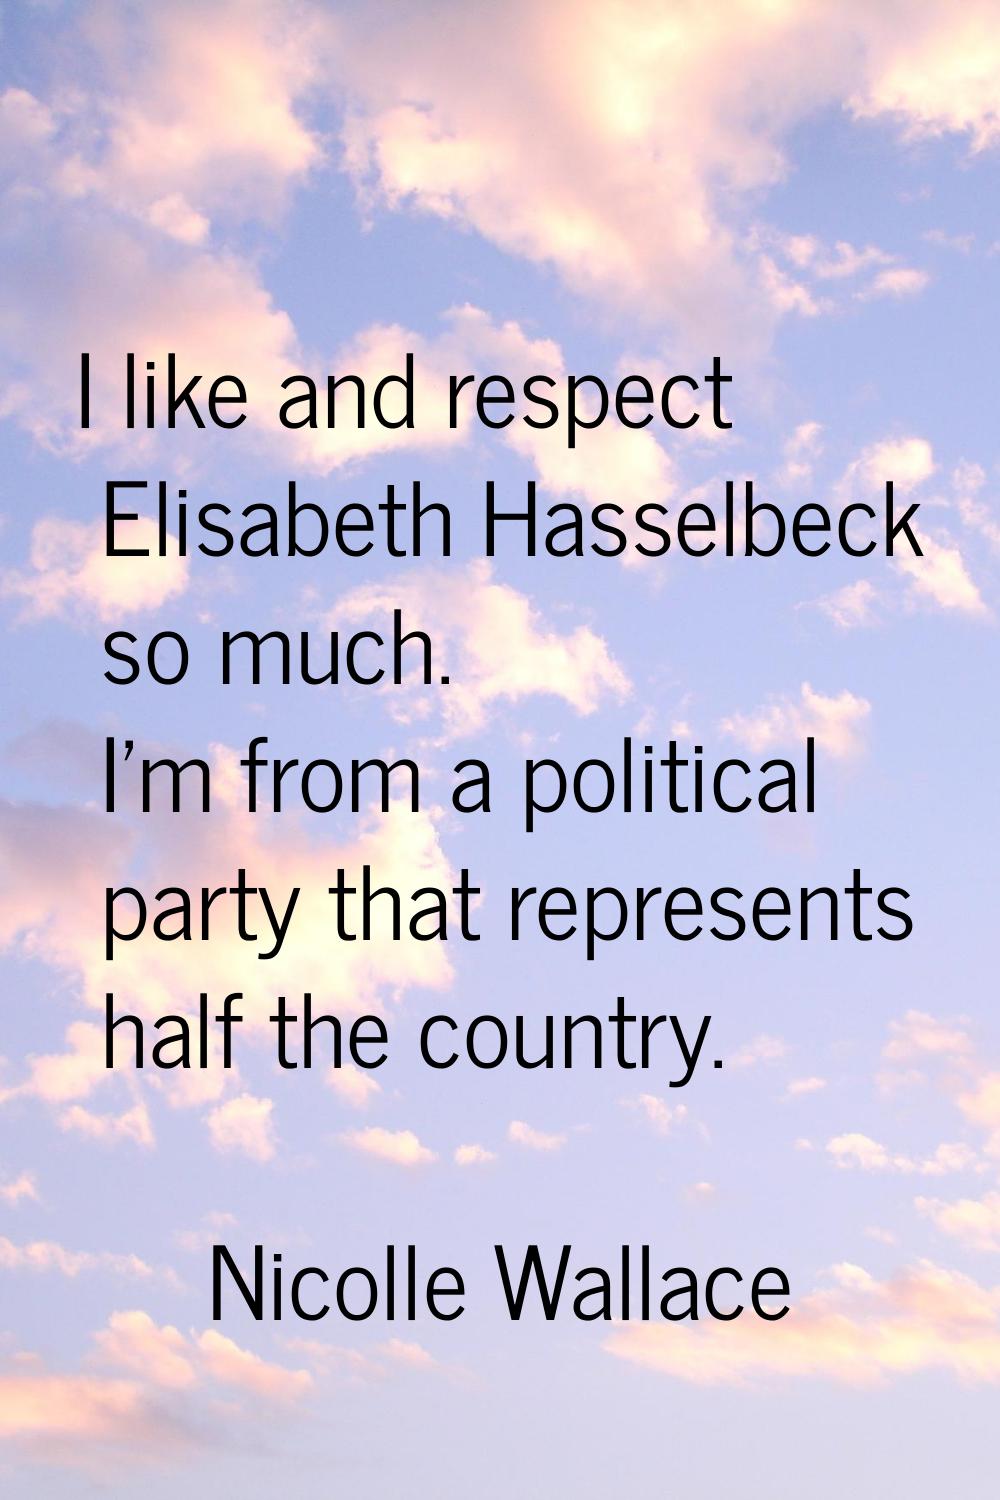 I like and respect Elisabeth Hasselbeck so much. I'm from a political party that represents half th